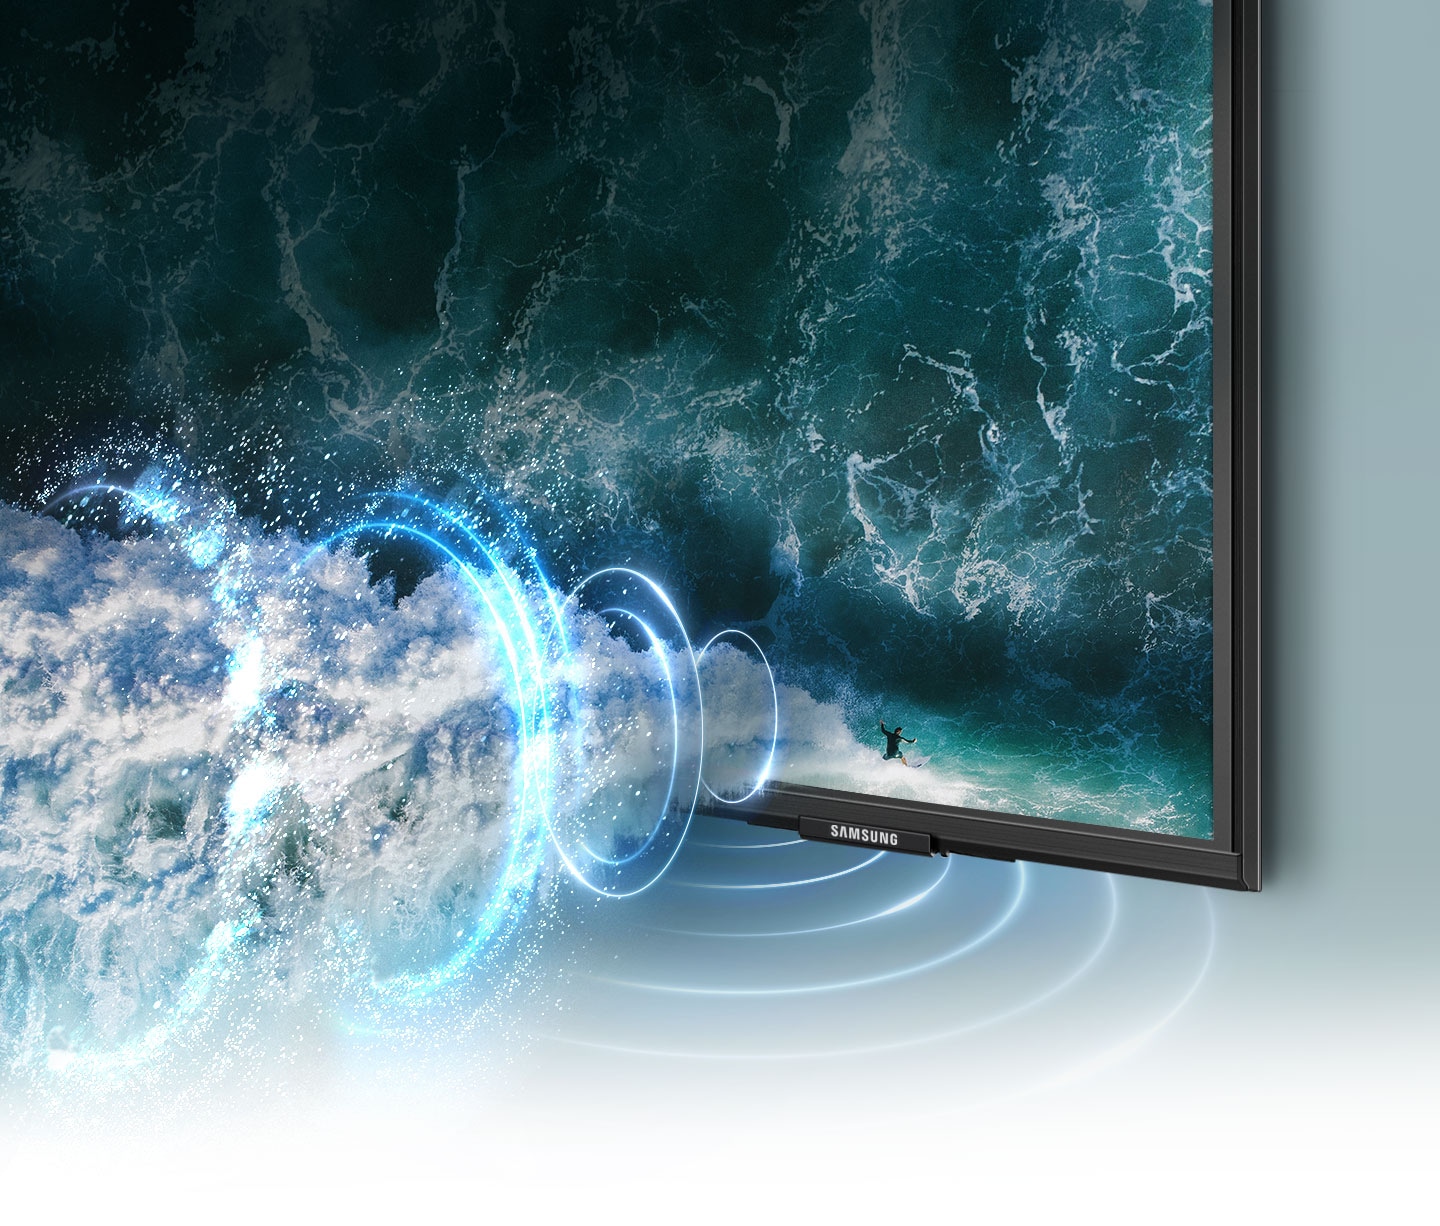 Simulated sound wave graphics demonstrate object tracking sound technology as it follows a surfer across the TV screen.